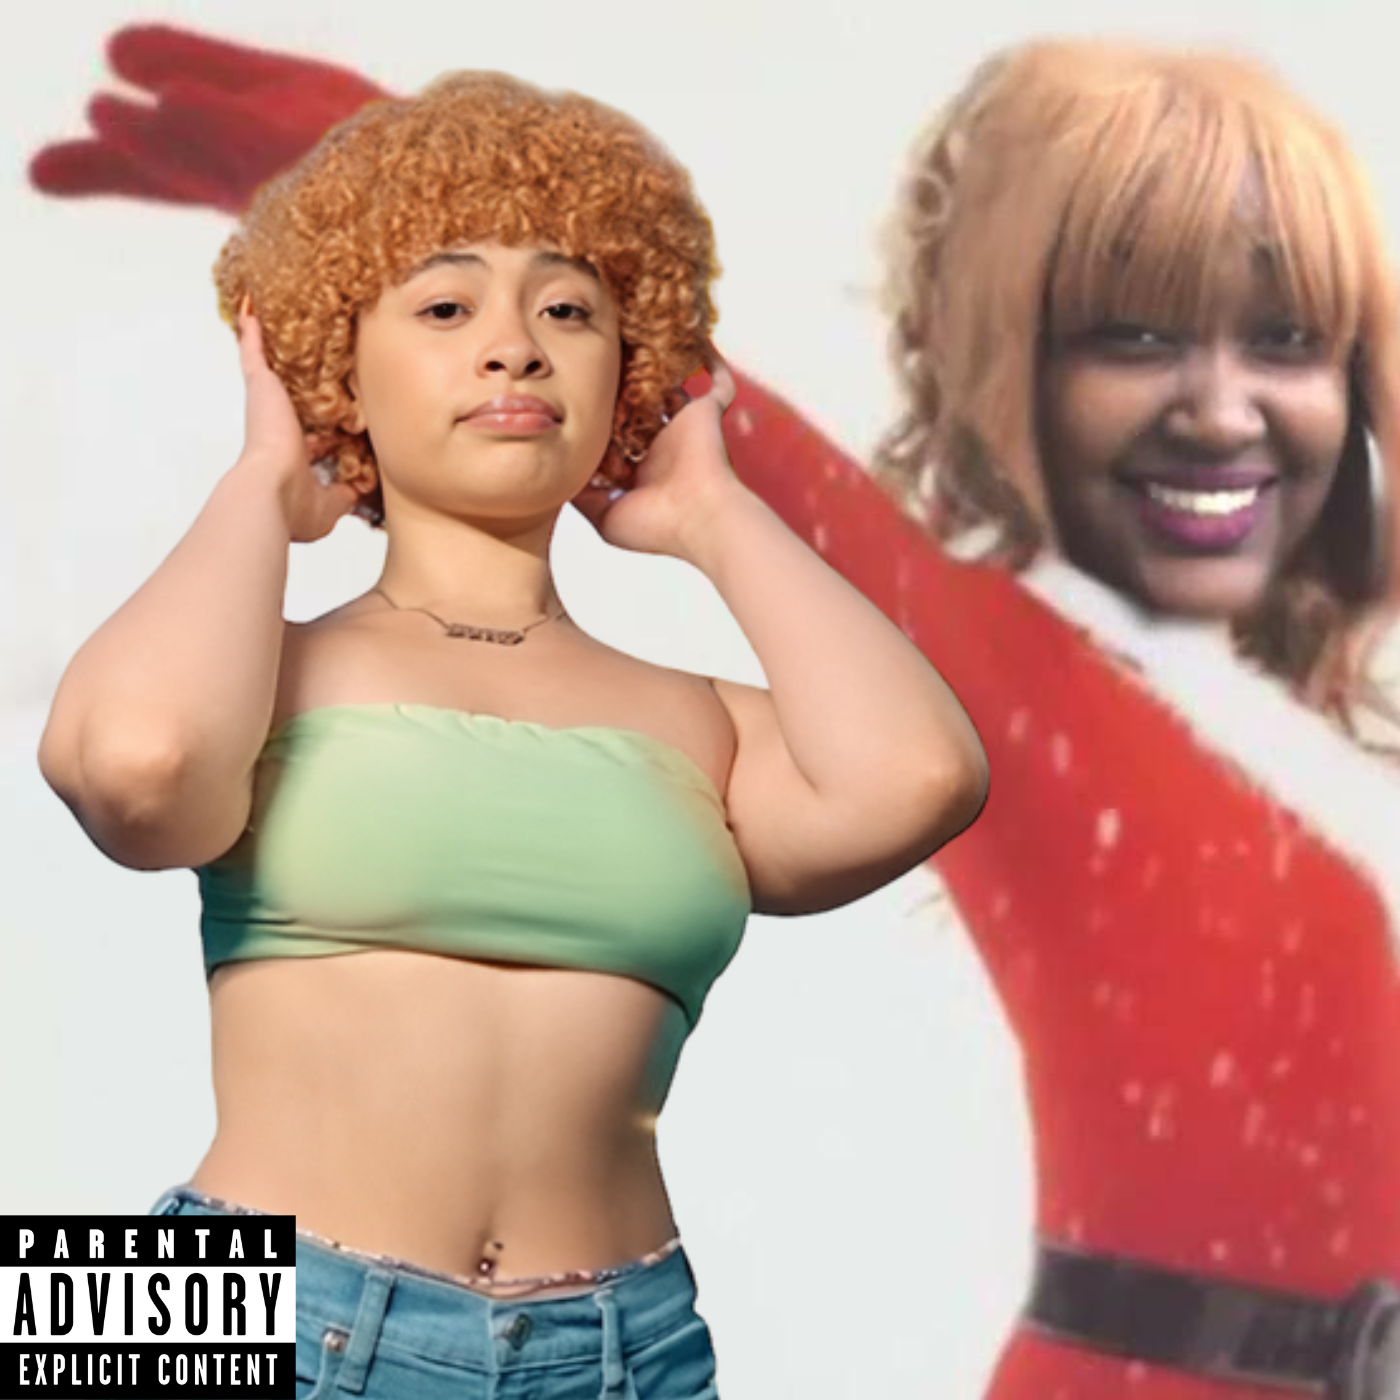 Mariah Carey, CupcakKe, Ice Spice, & Cast - Celebrity Parodies — All I Want For Christmas Is Yo Is Dick cover artwork